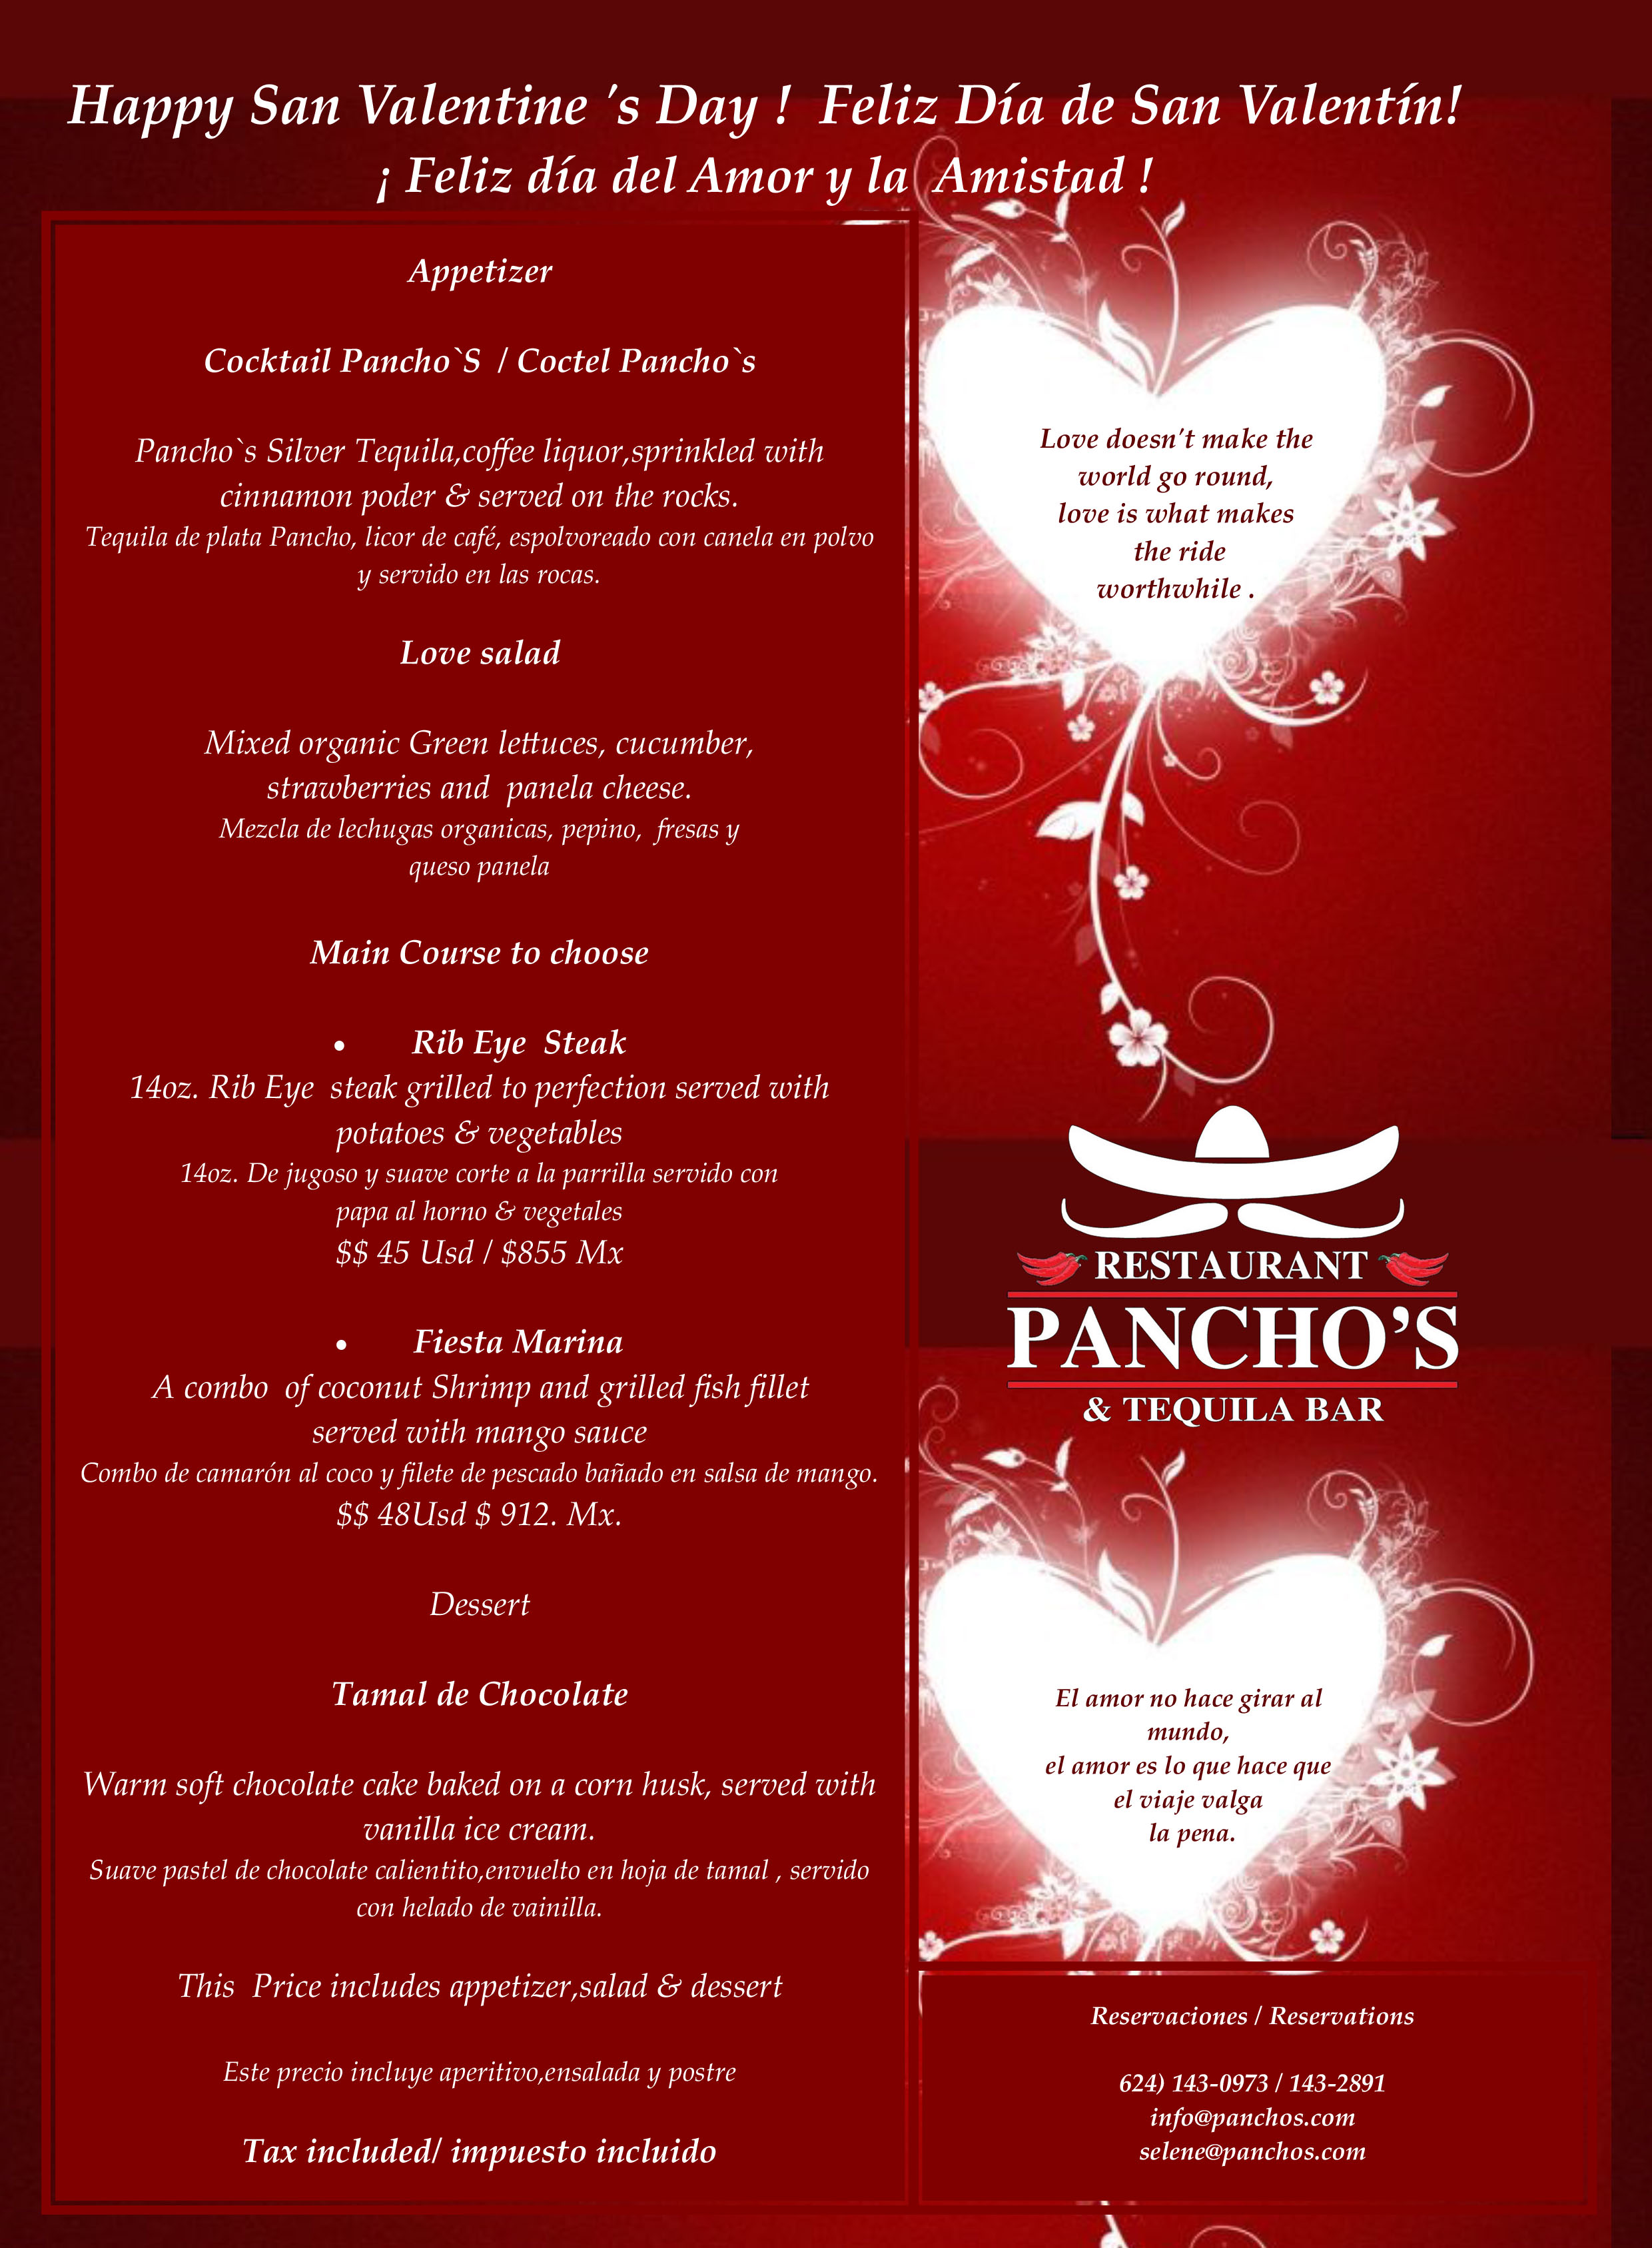 Valentine's Day at Pancho's - Events Los Cabos